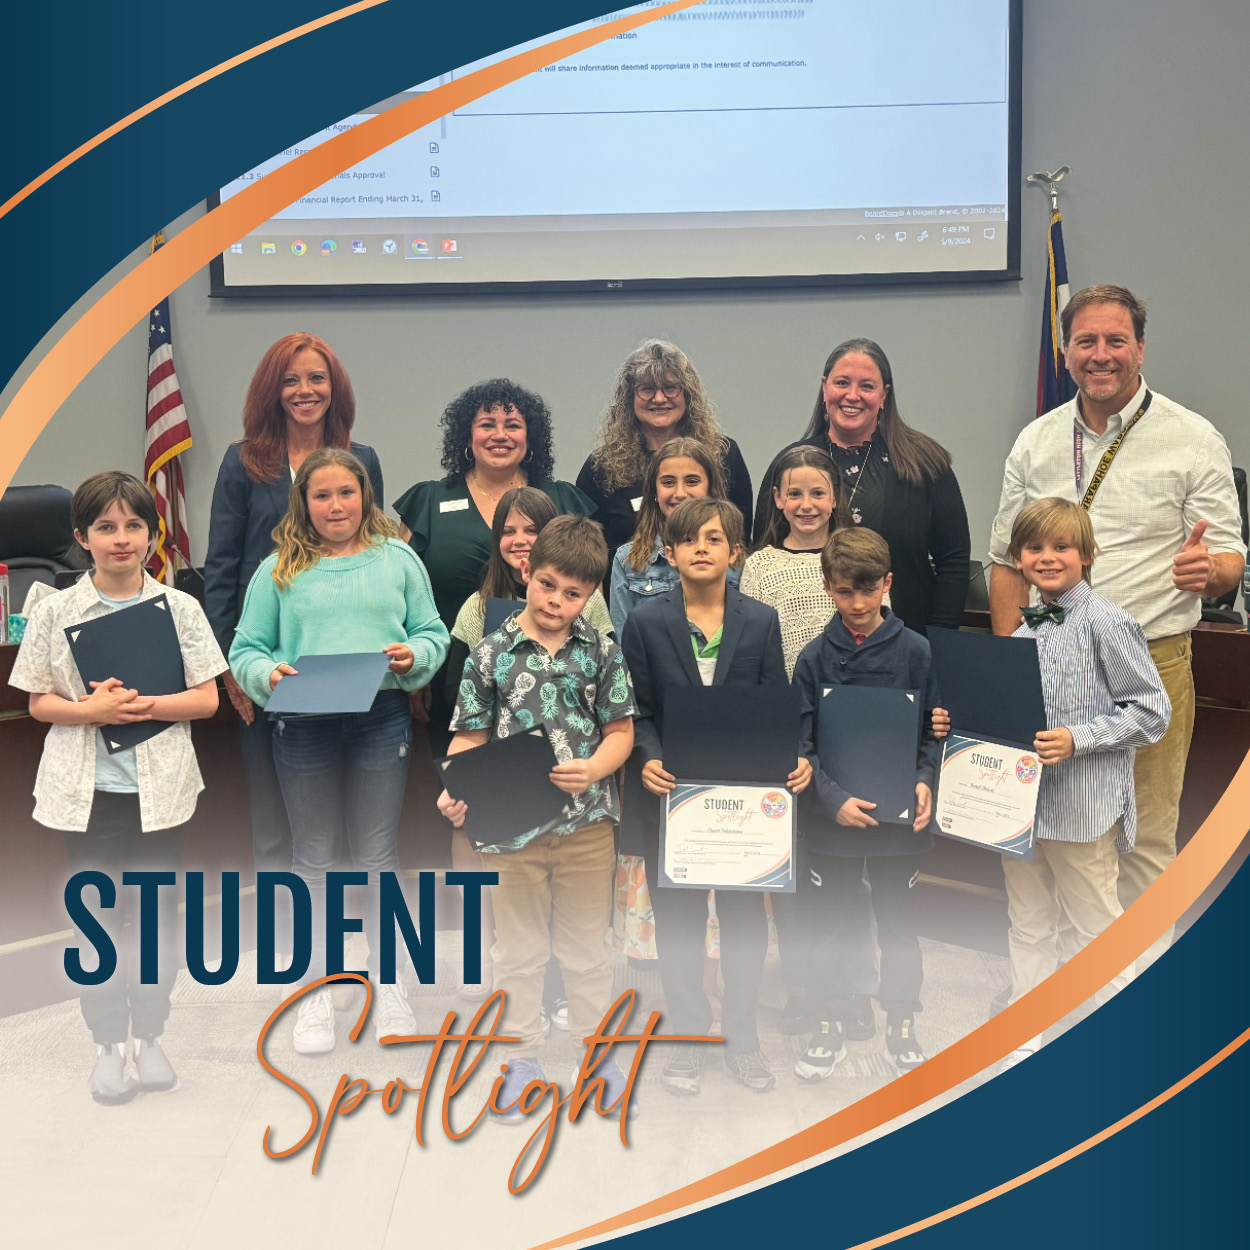 Runyon Elementary School students in a group photo with Board of Education members in front of the Board's dais. Students are holding certificates.